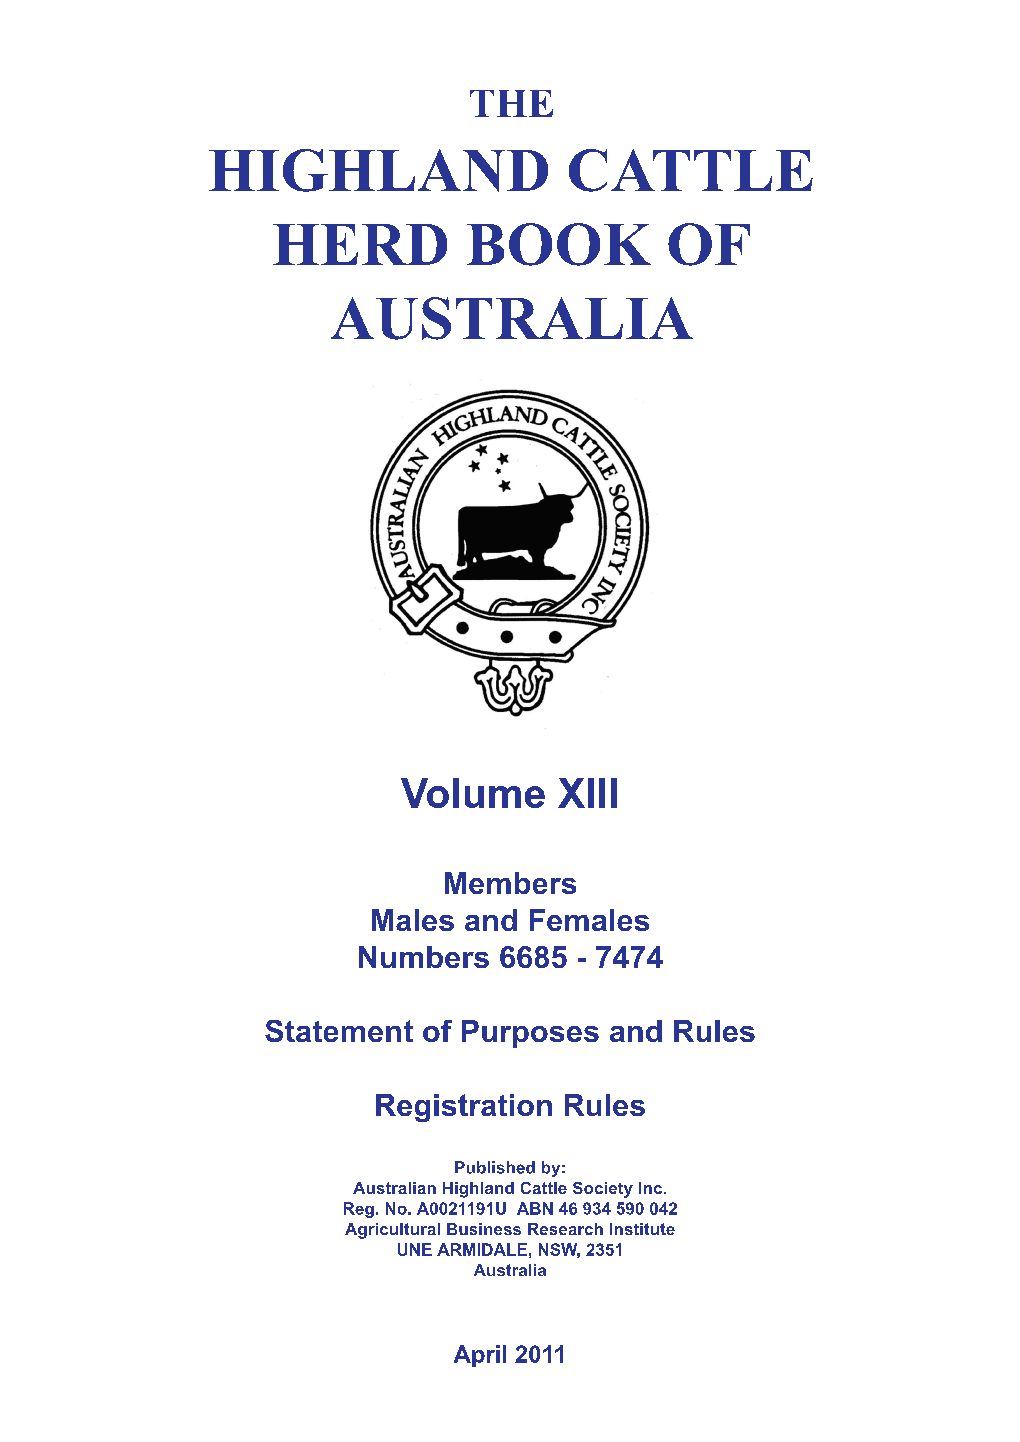 Australian Highland Cattle Society Table of Contents